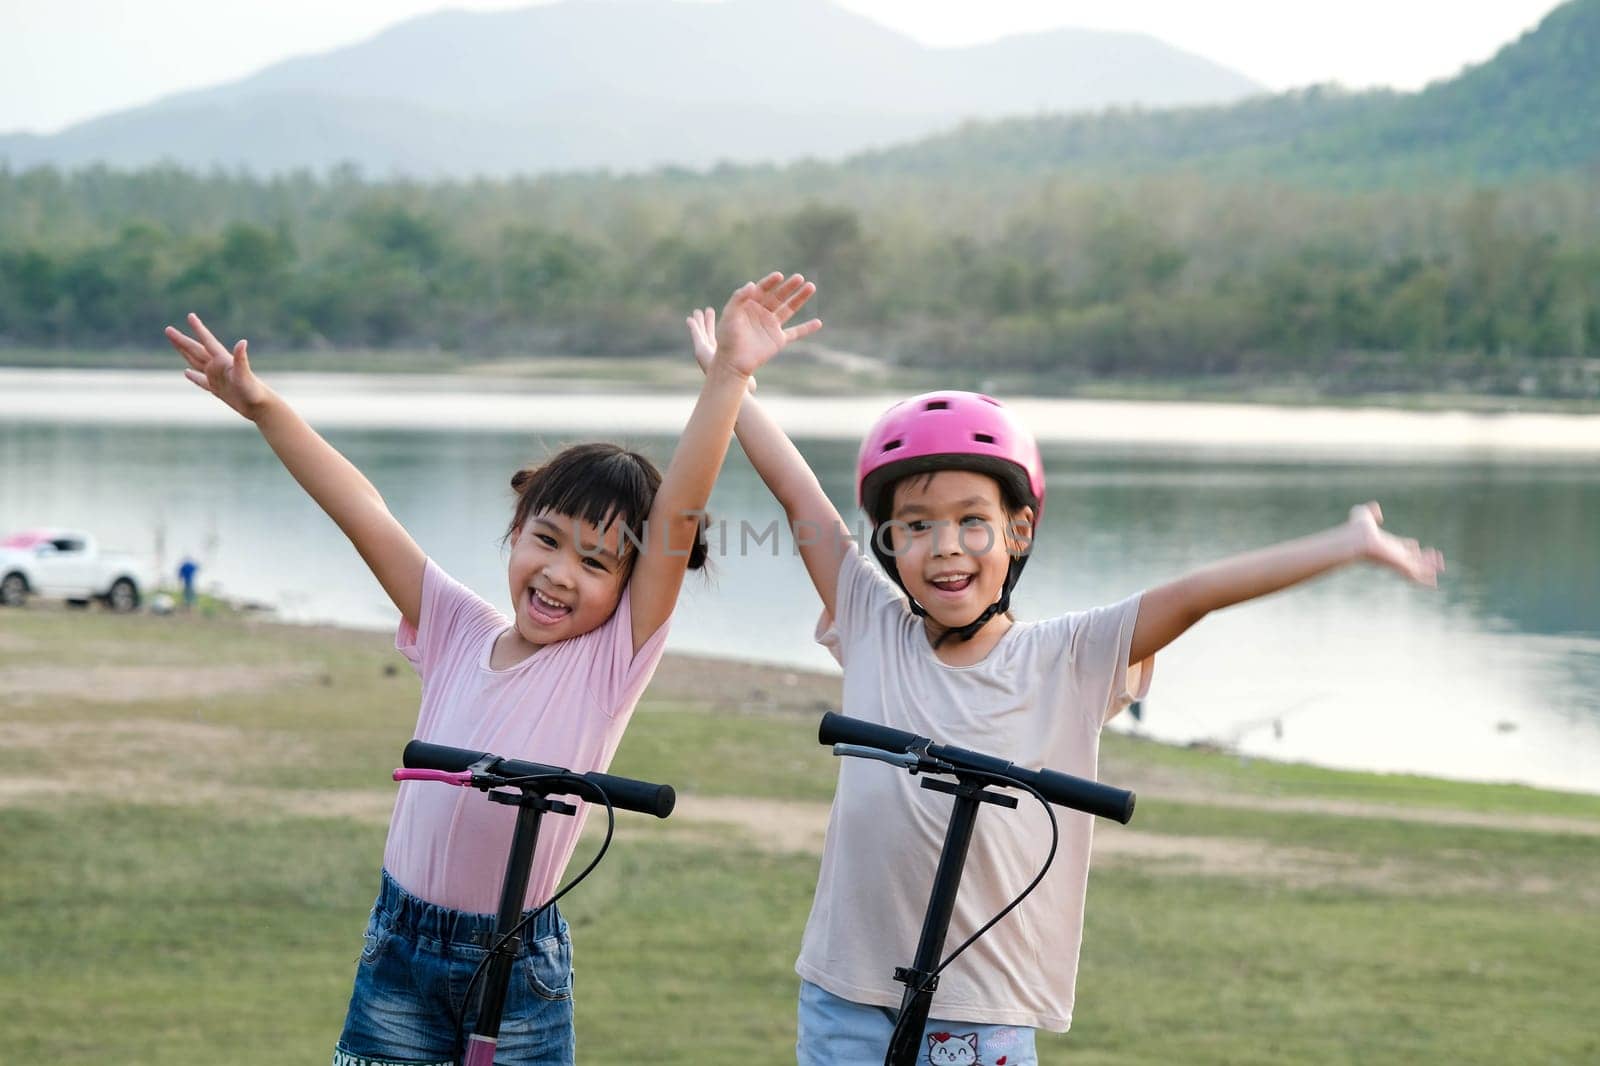 Two cute little girls smiling and posing together in summer garden. Happy kid riding kick scooter in the park. Healthy sports and outdoor activities for children. by TEERASAK